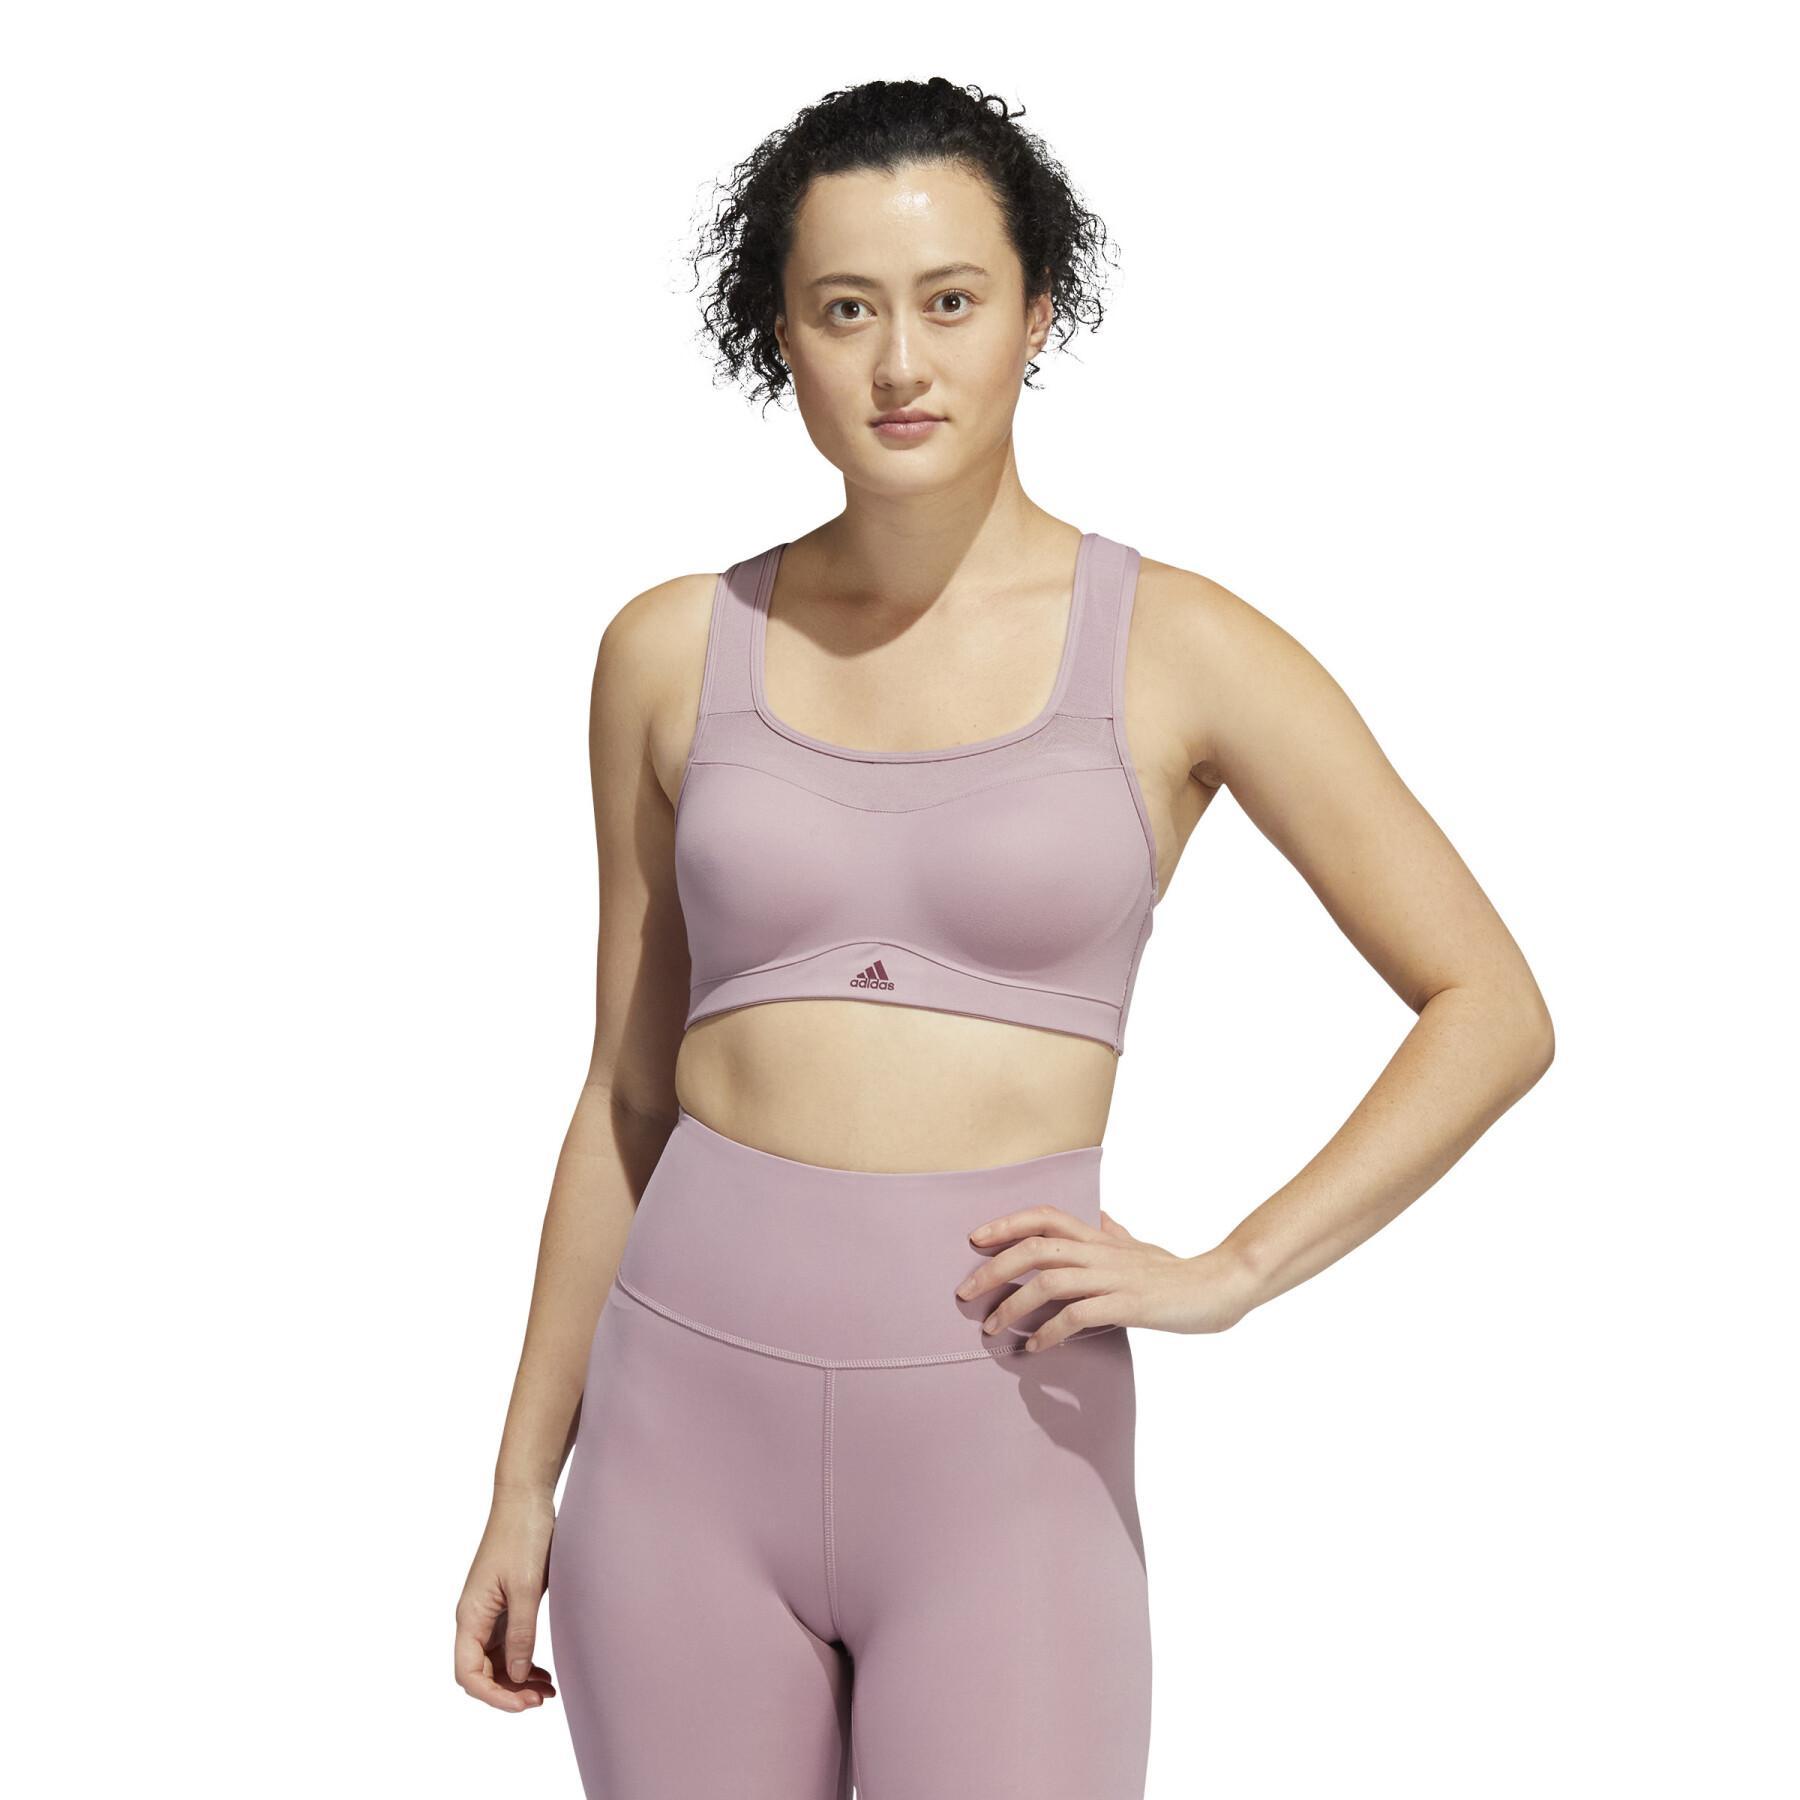 Brassière maintien fort femme adidas TLRD Impact Training